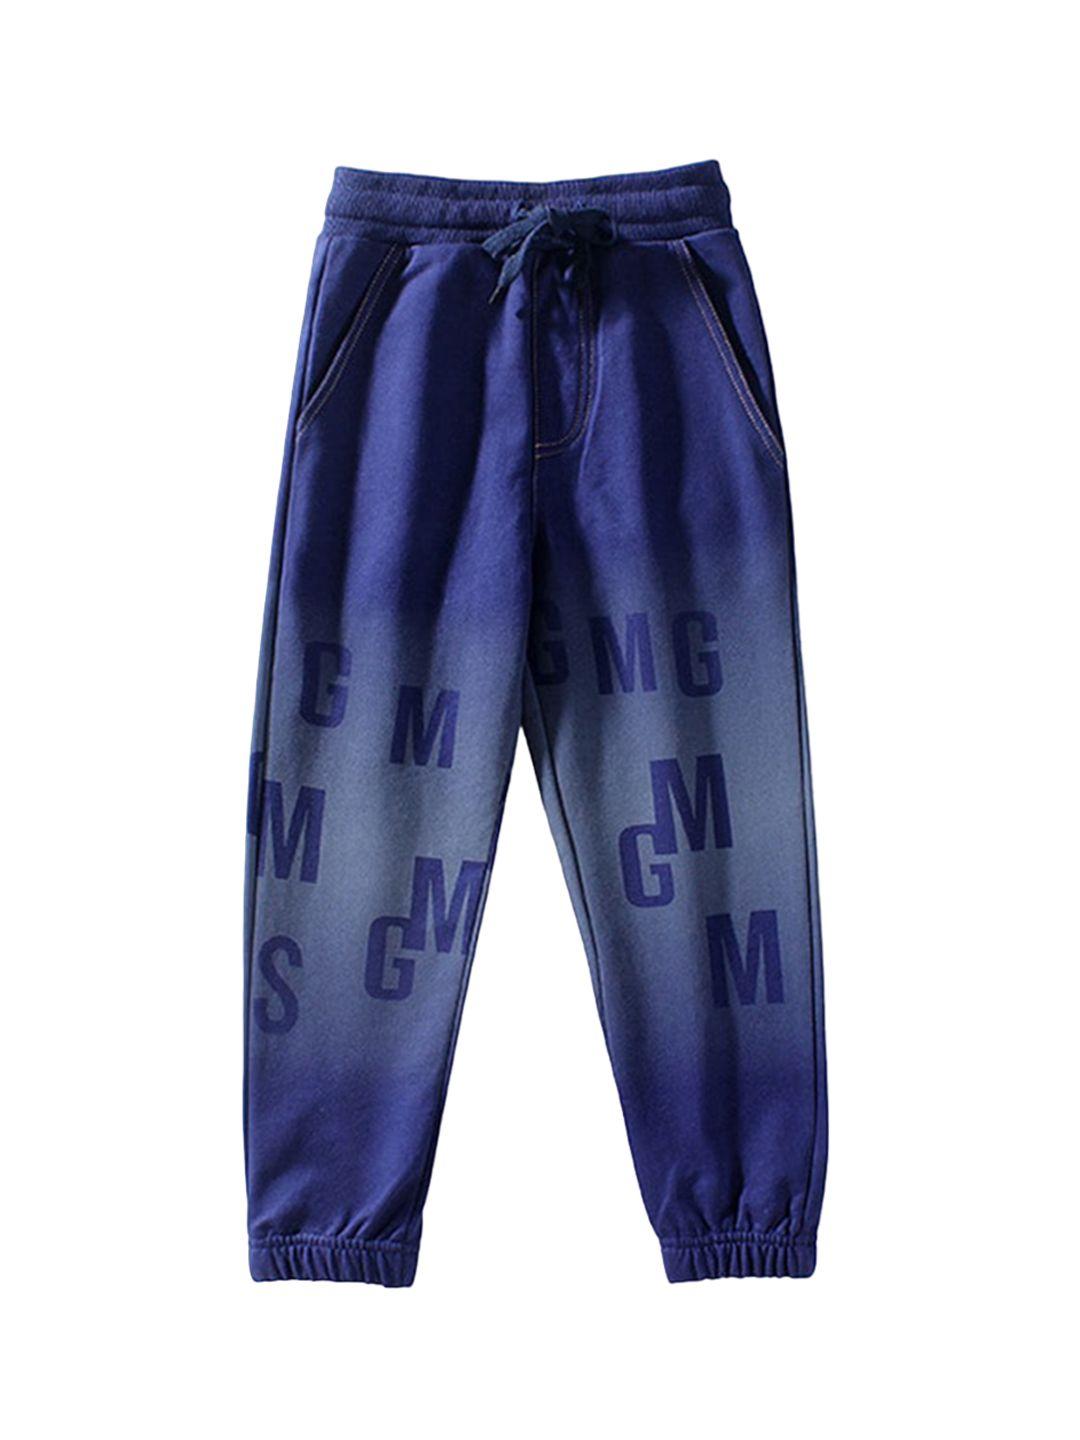 stylecast-boys-blue-printed-regular-fit-easy-wash-cotton-joggers